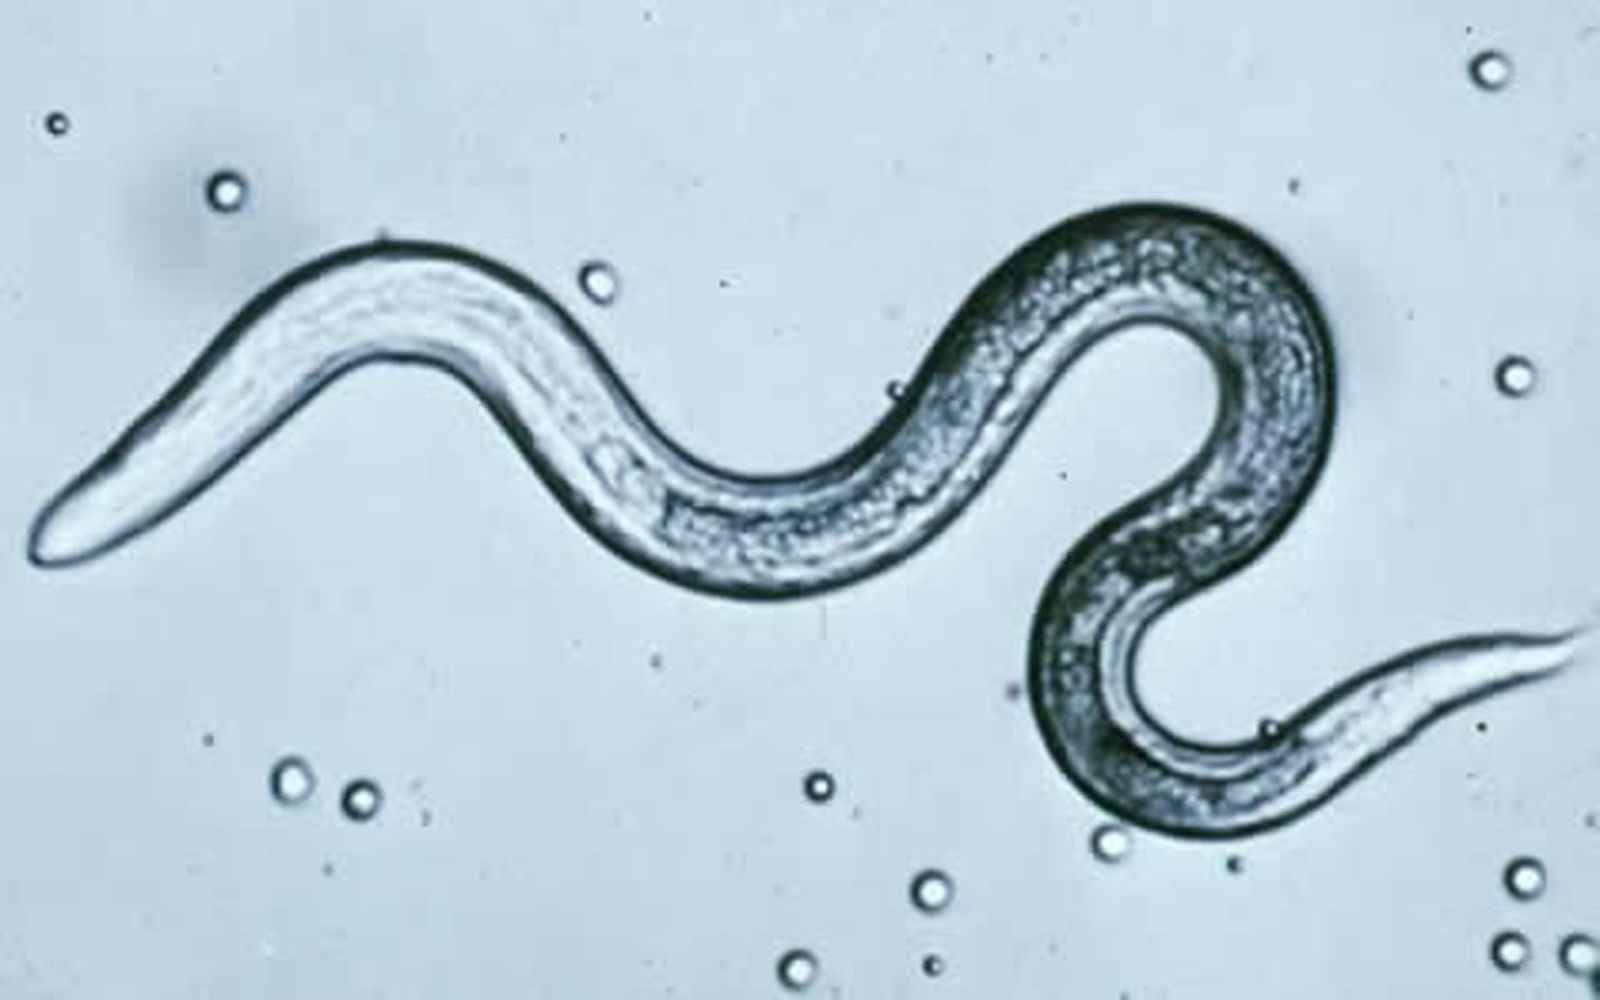 tapeworm in dogs microscope